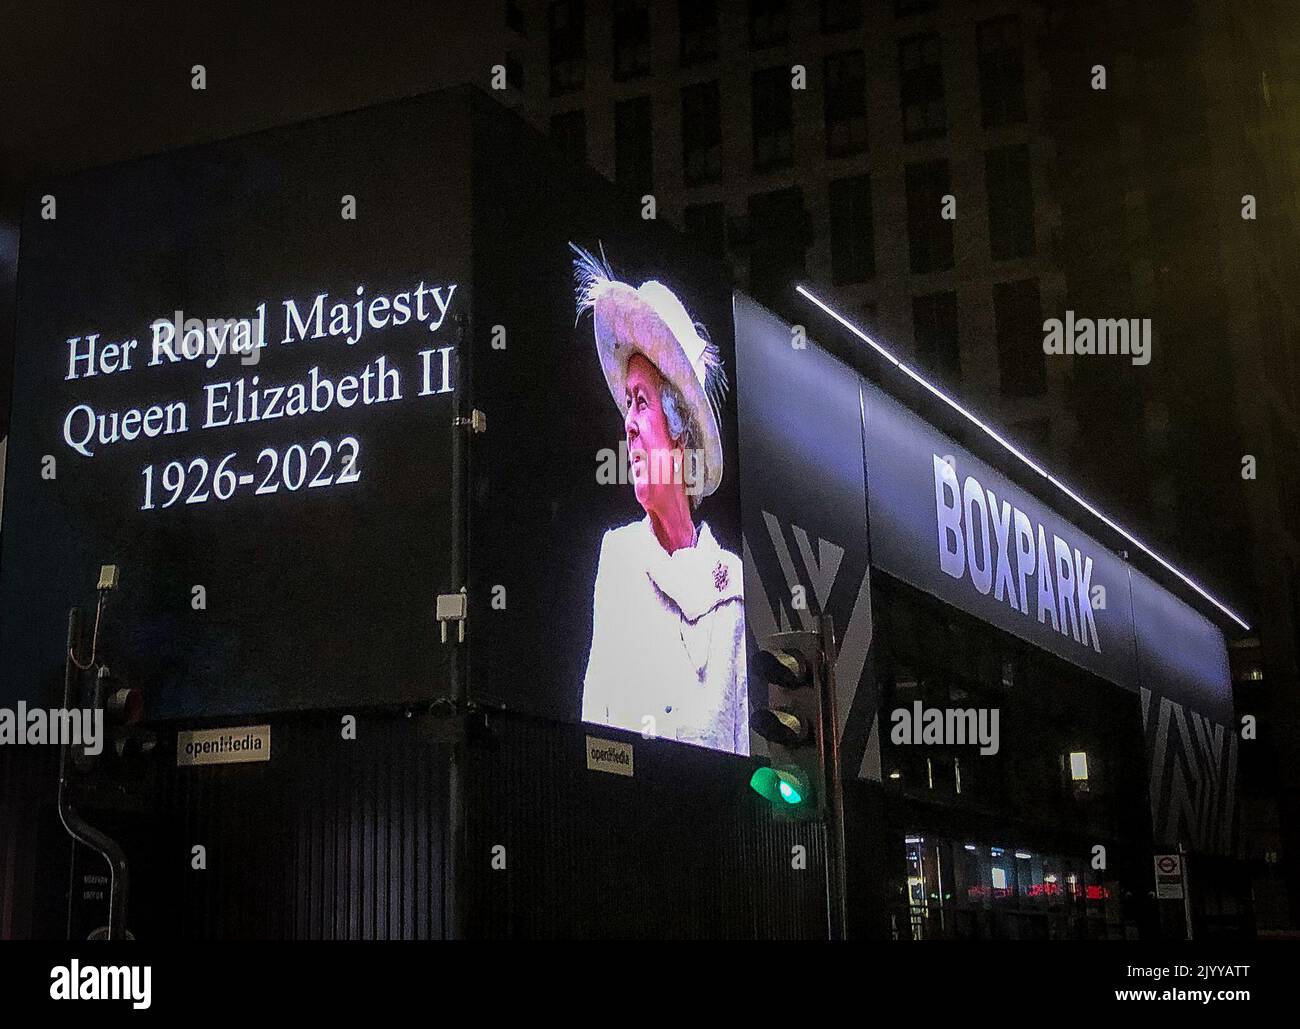 London, UK. 08th Sep, 2022. Queen Elizabeth II is displayed at Boxpark near to Wembley Stadium on September 8, 2022 following news of her death at the age 96 earlier in the day. Photo by Andrew Aleksiejczuk. Credit: PRiME Media Images/Alamy Live News Stock Photo